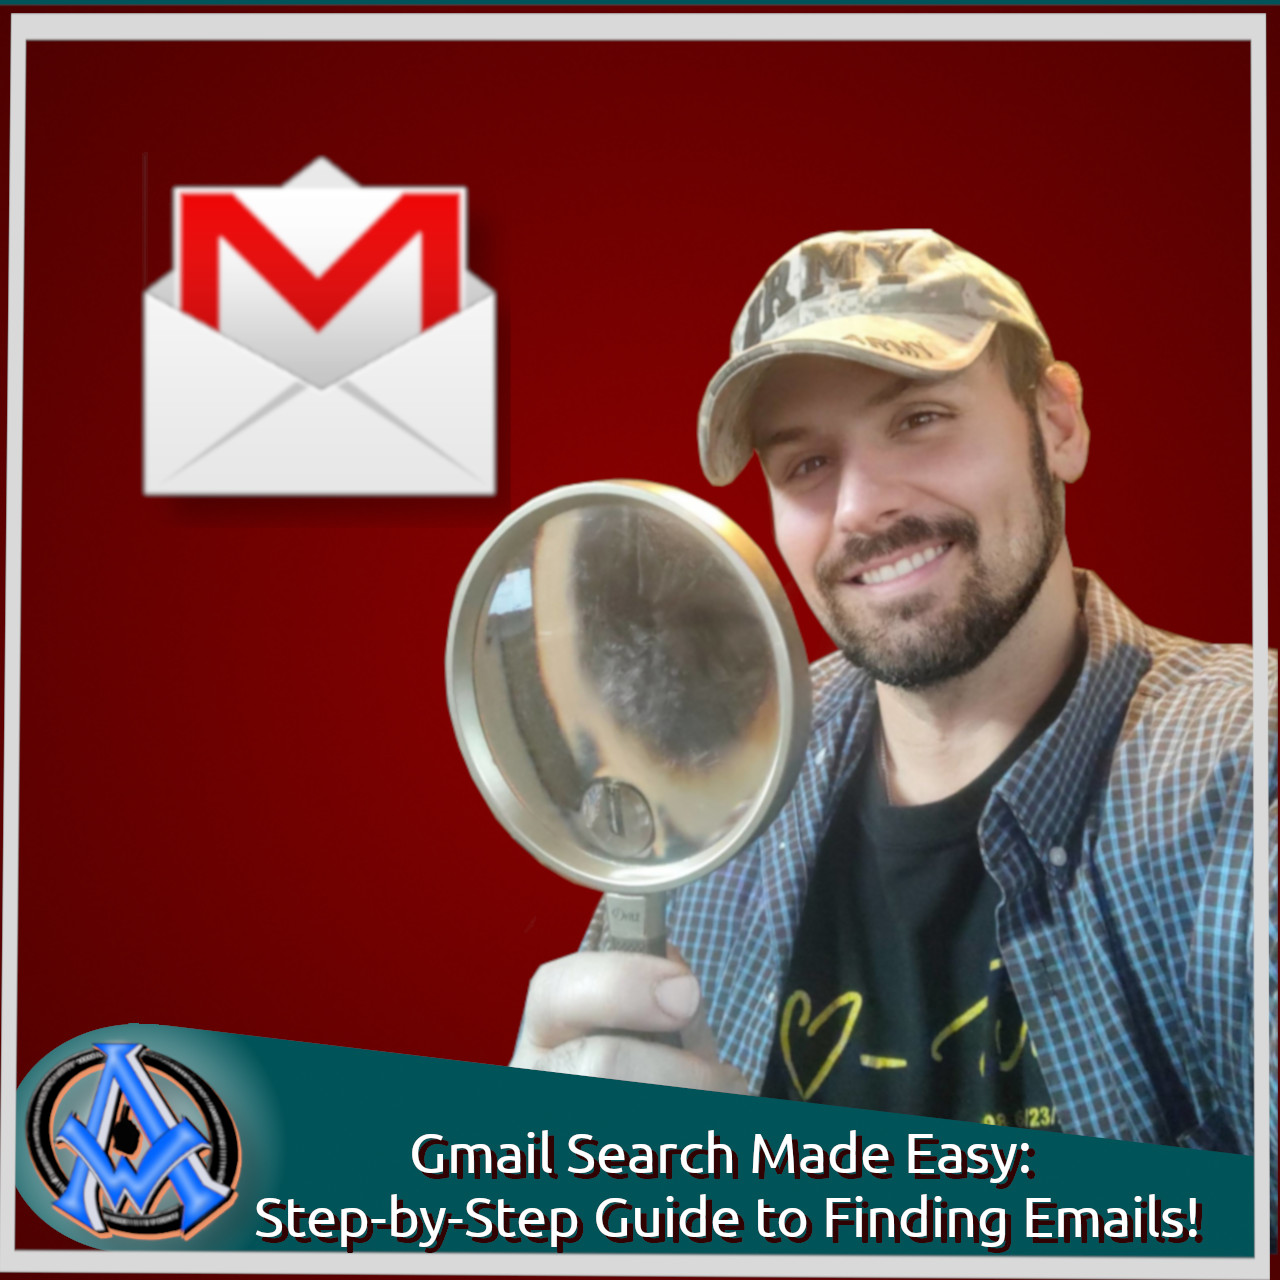 Gmail Search Made Easy: Step-by-Step Guide to Finding Emails!